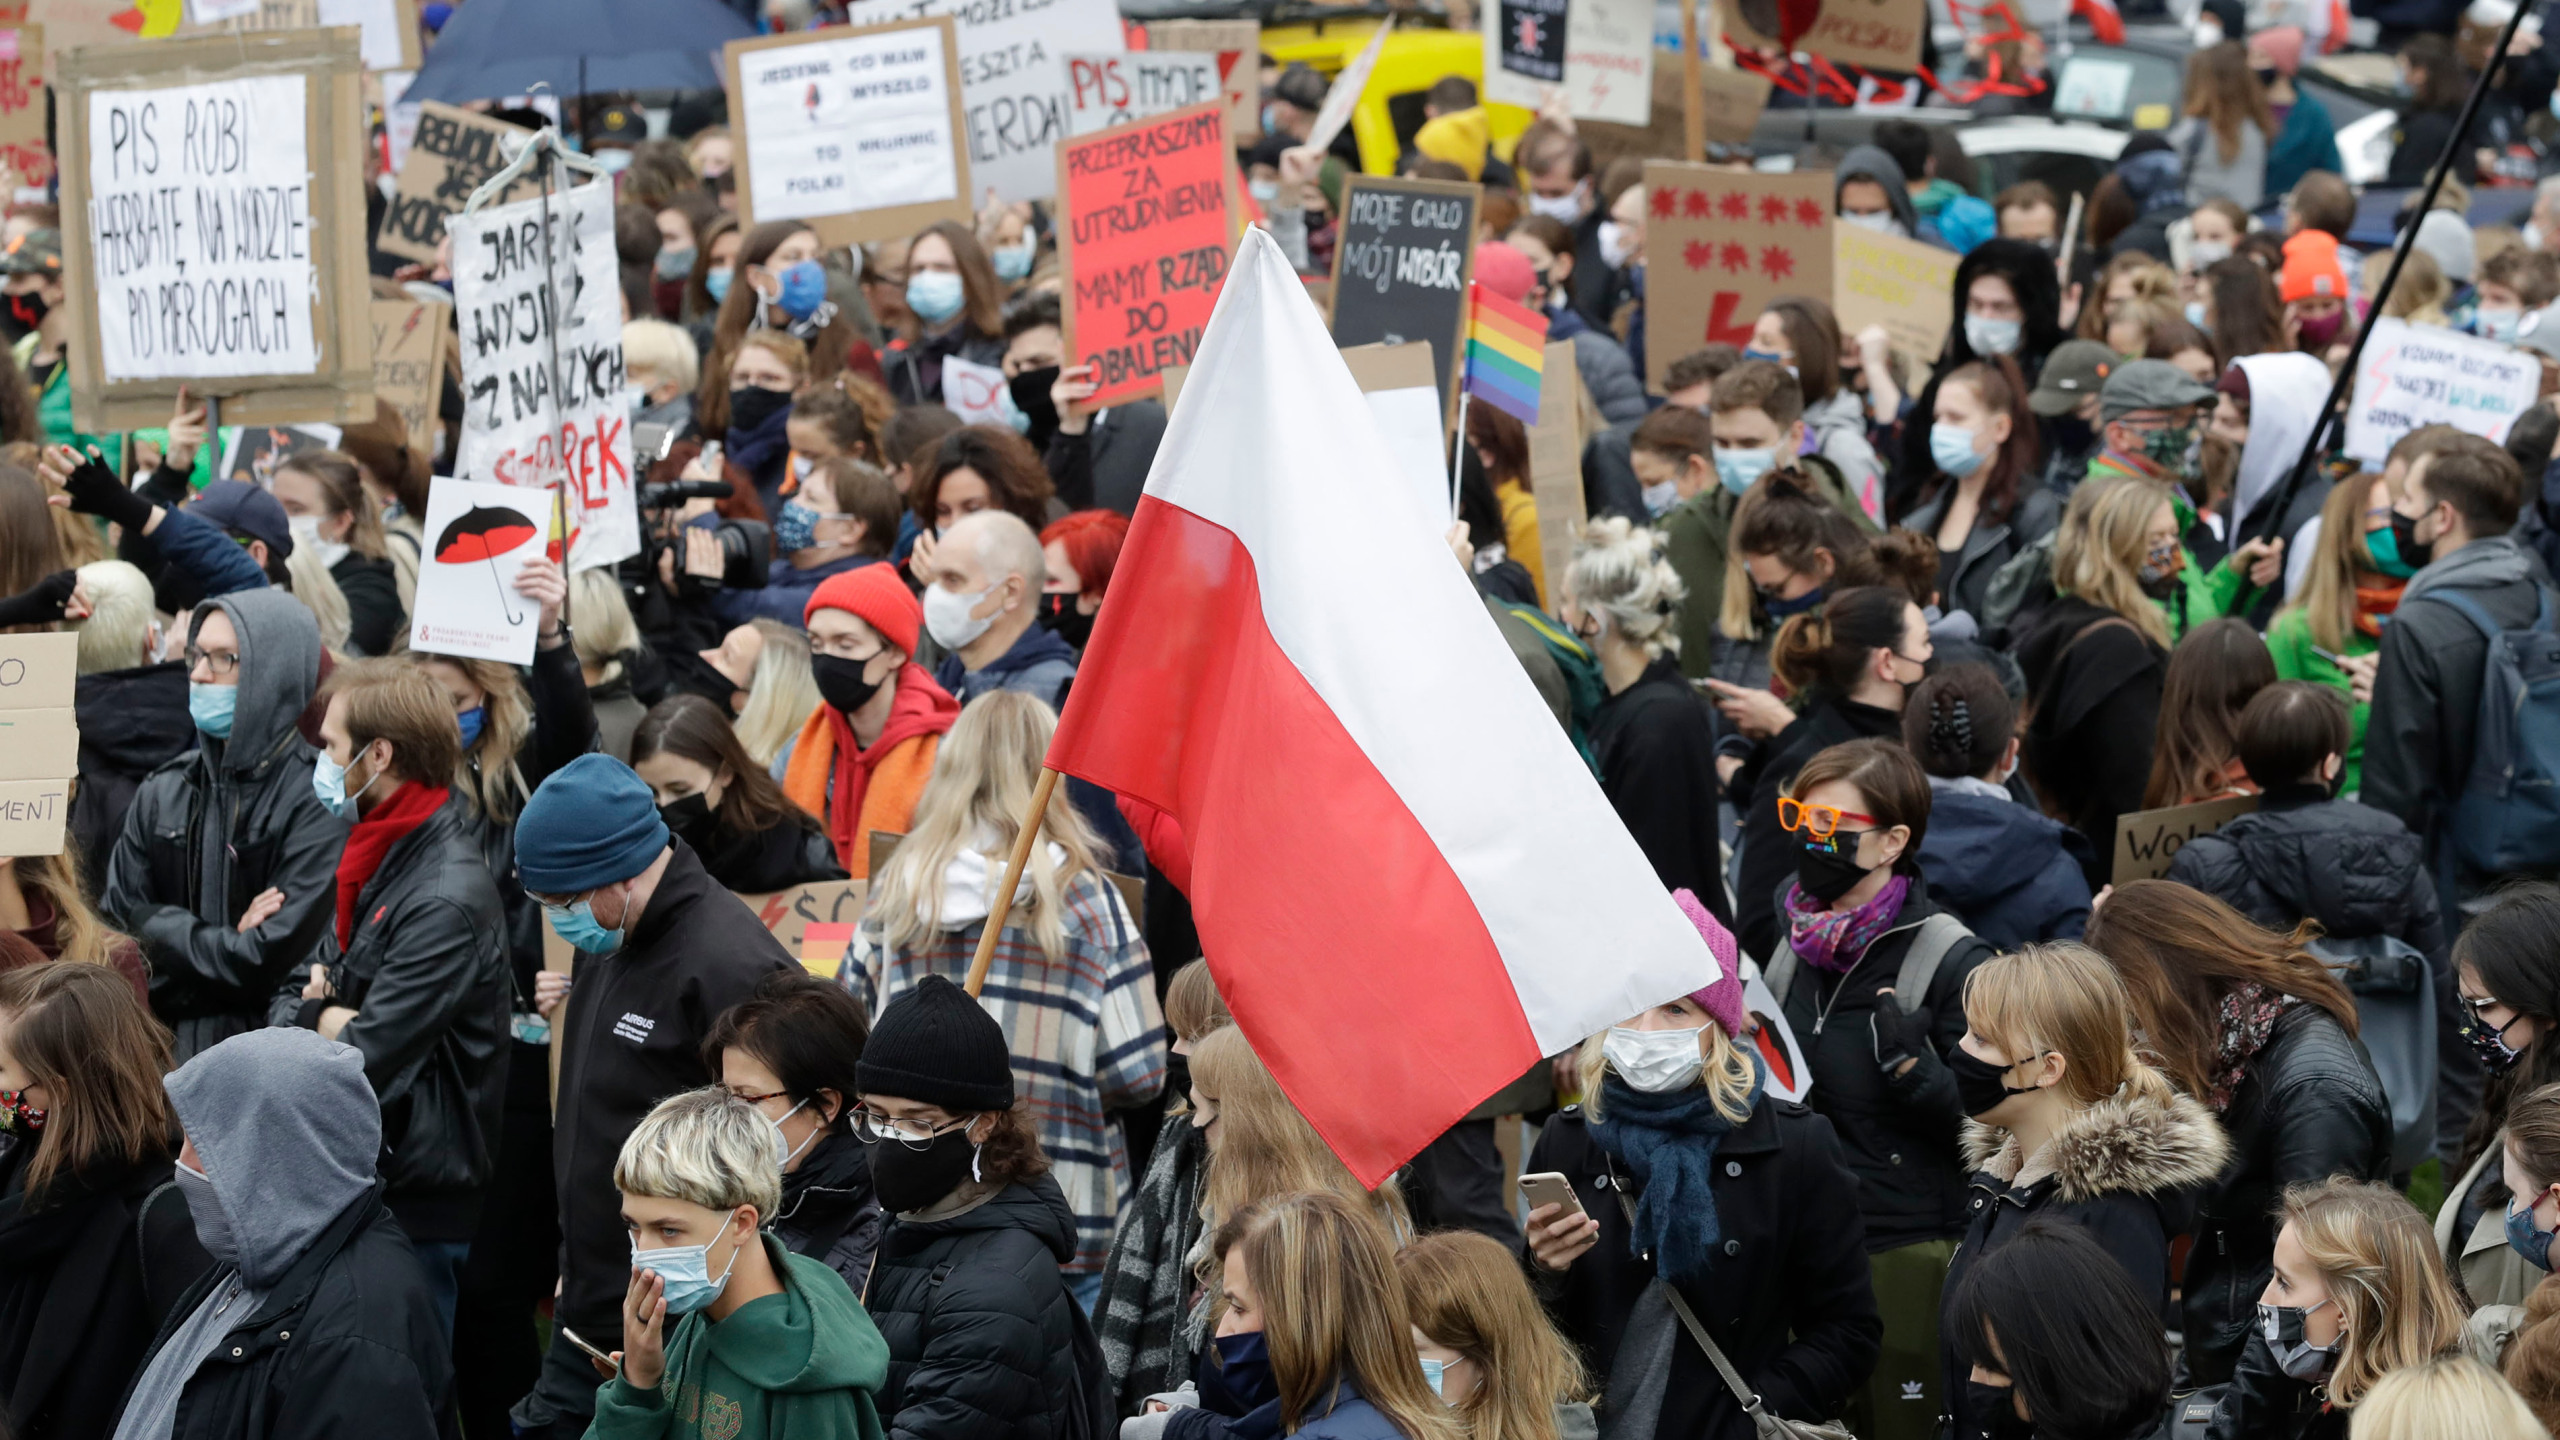 20 People Detained After Abortion Law Protest in Warsaw